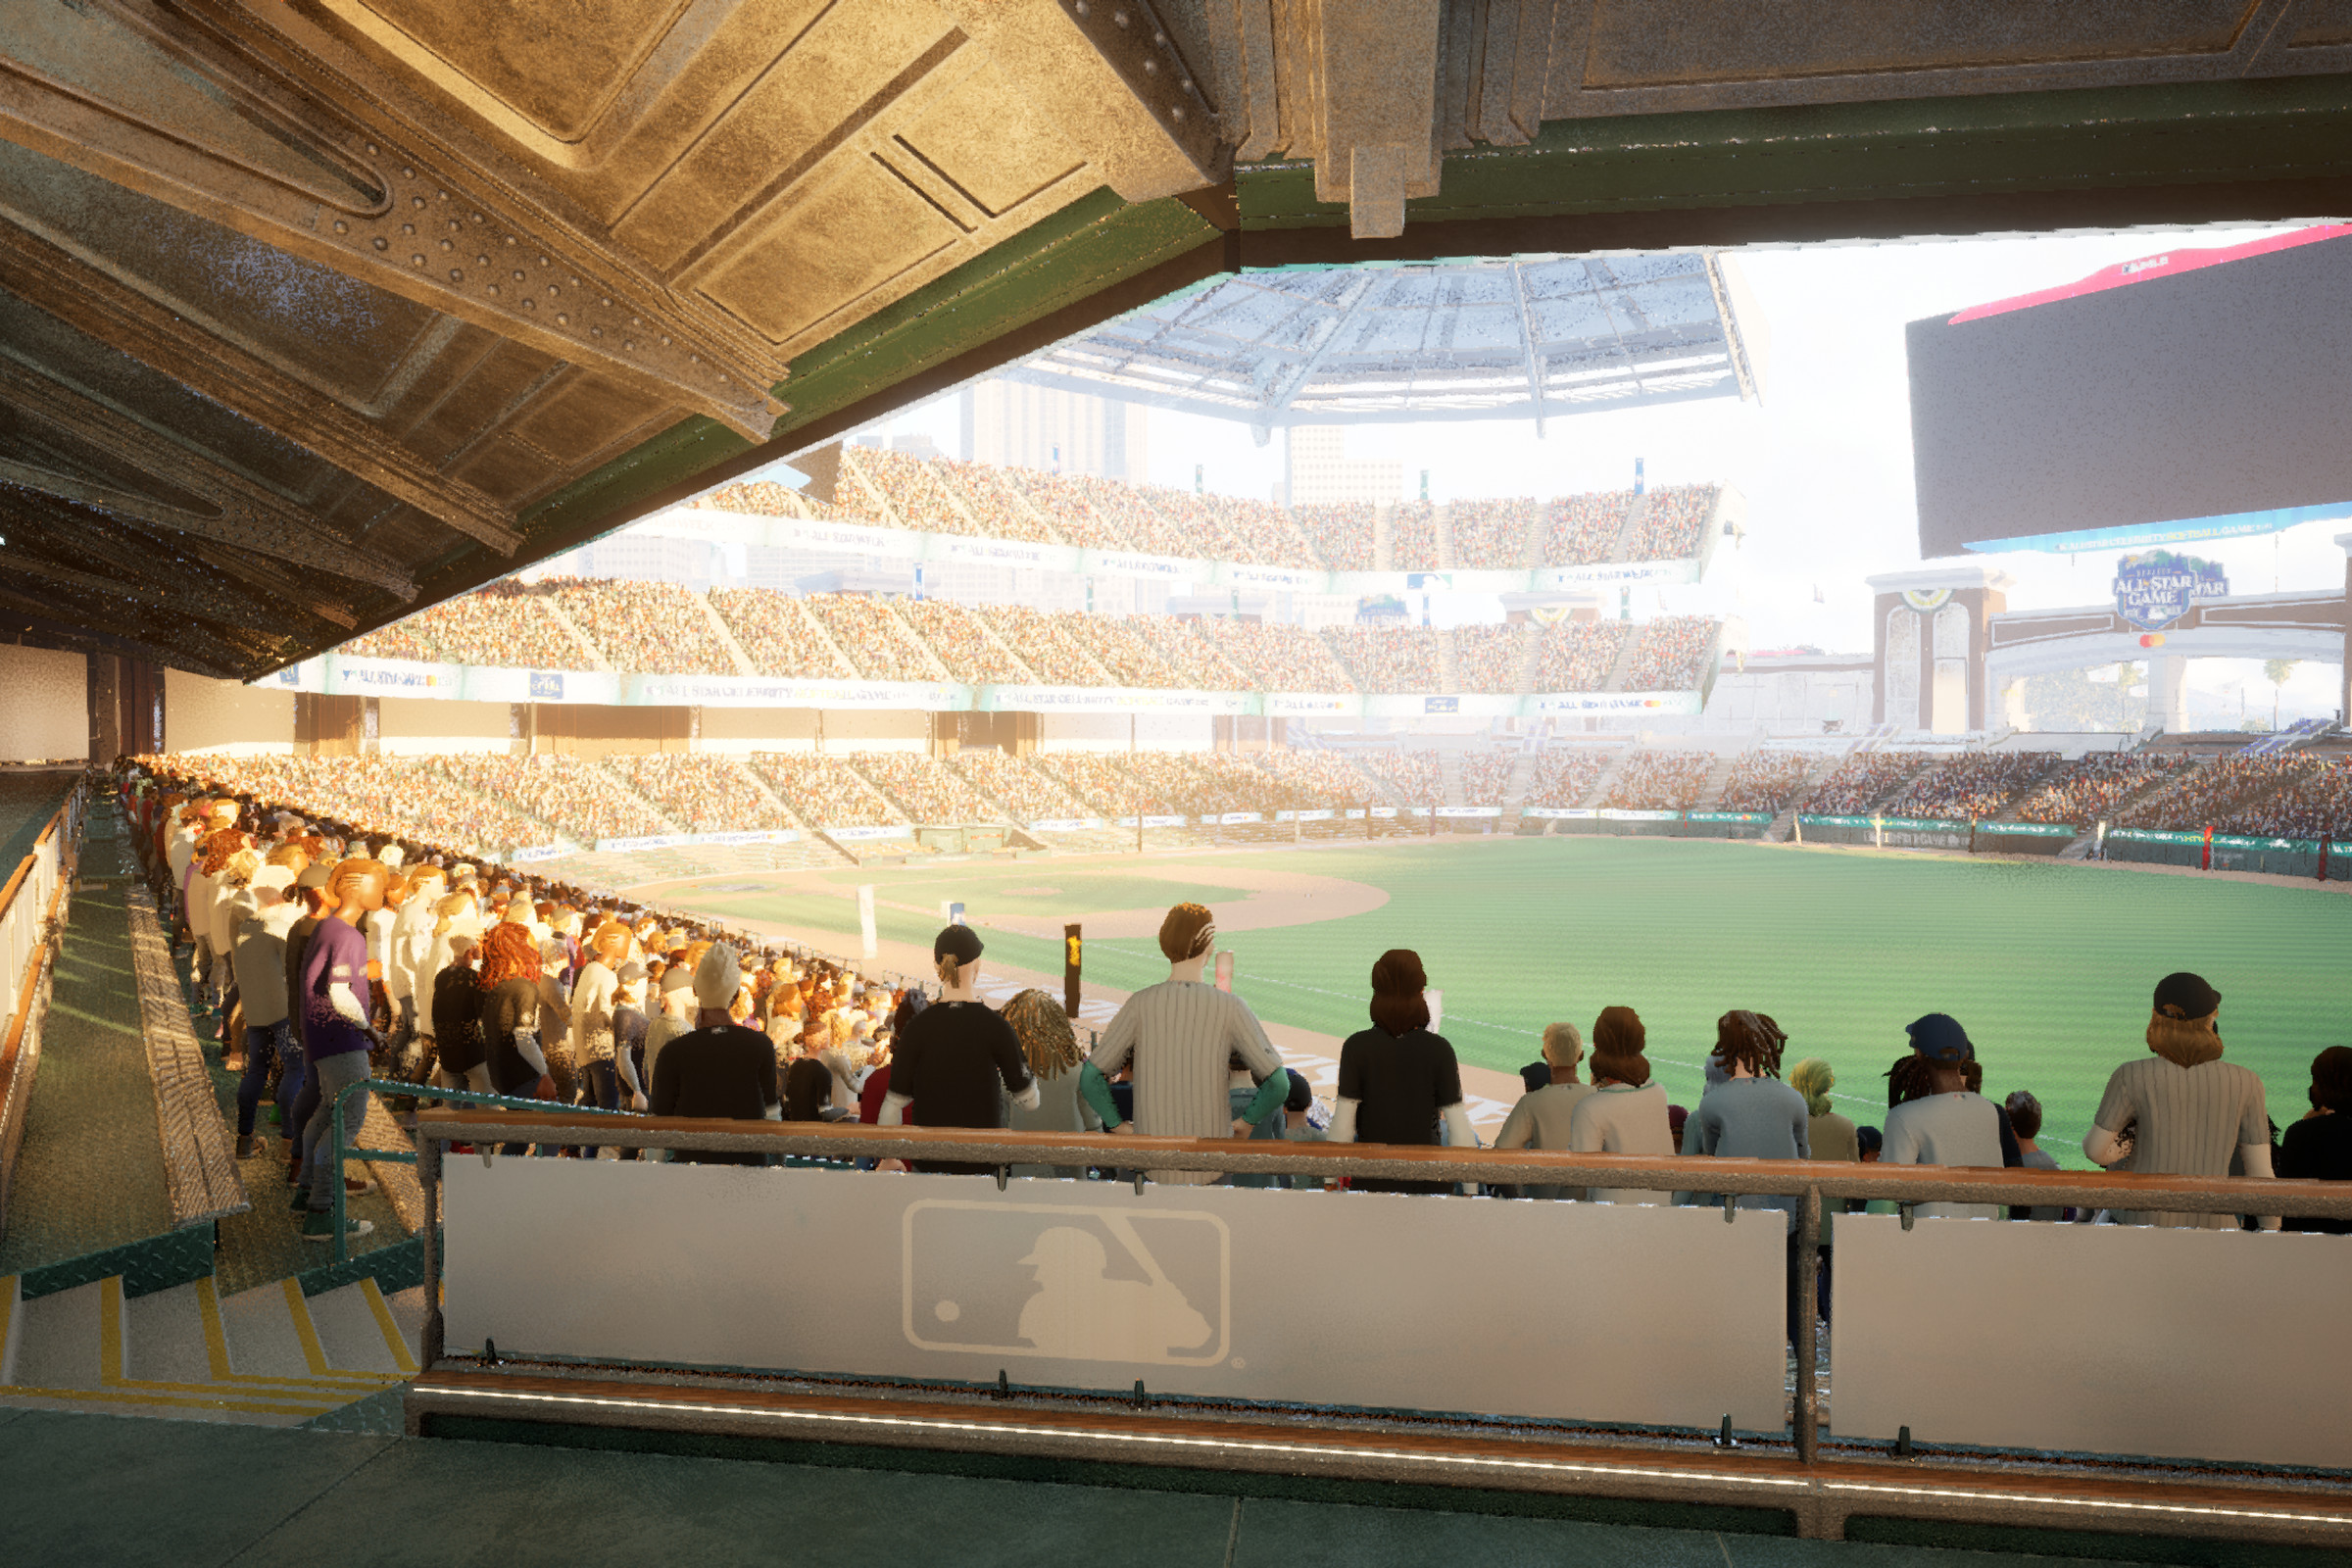 A screenshot of the virtual ballpark, showing avatars in the stands, the baseball field, and the screen on which video content will be streamed.